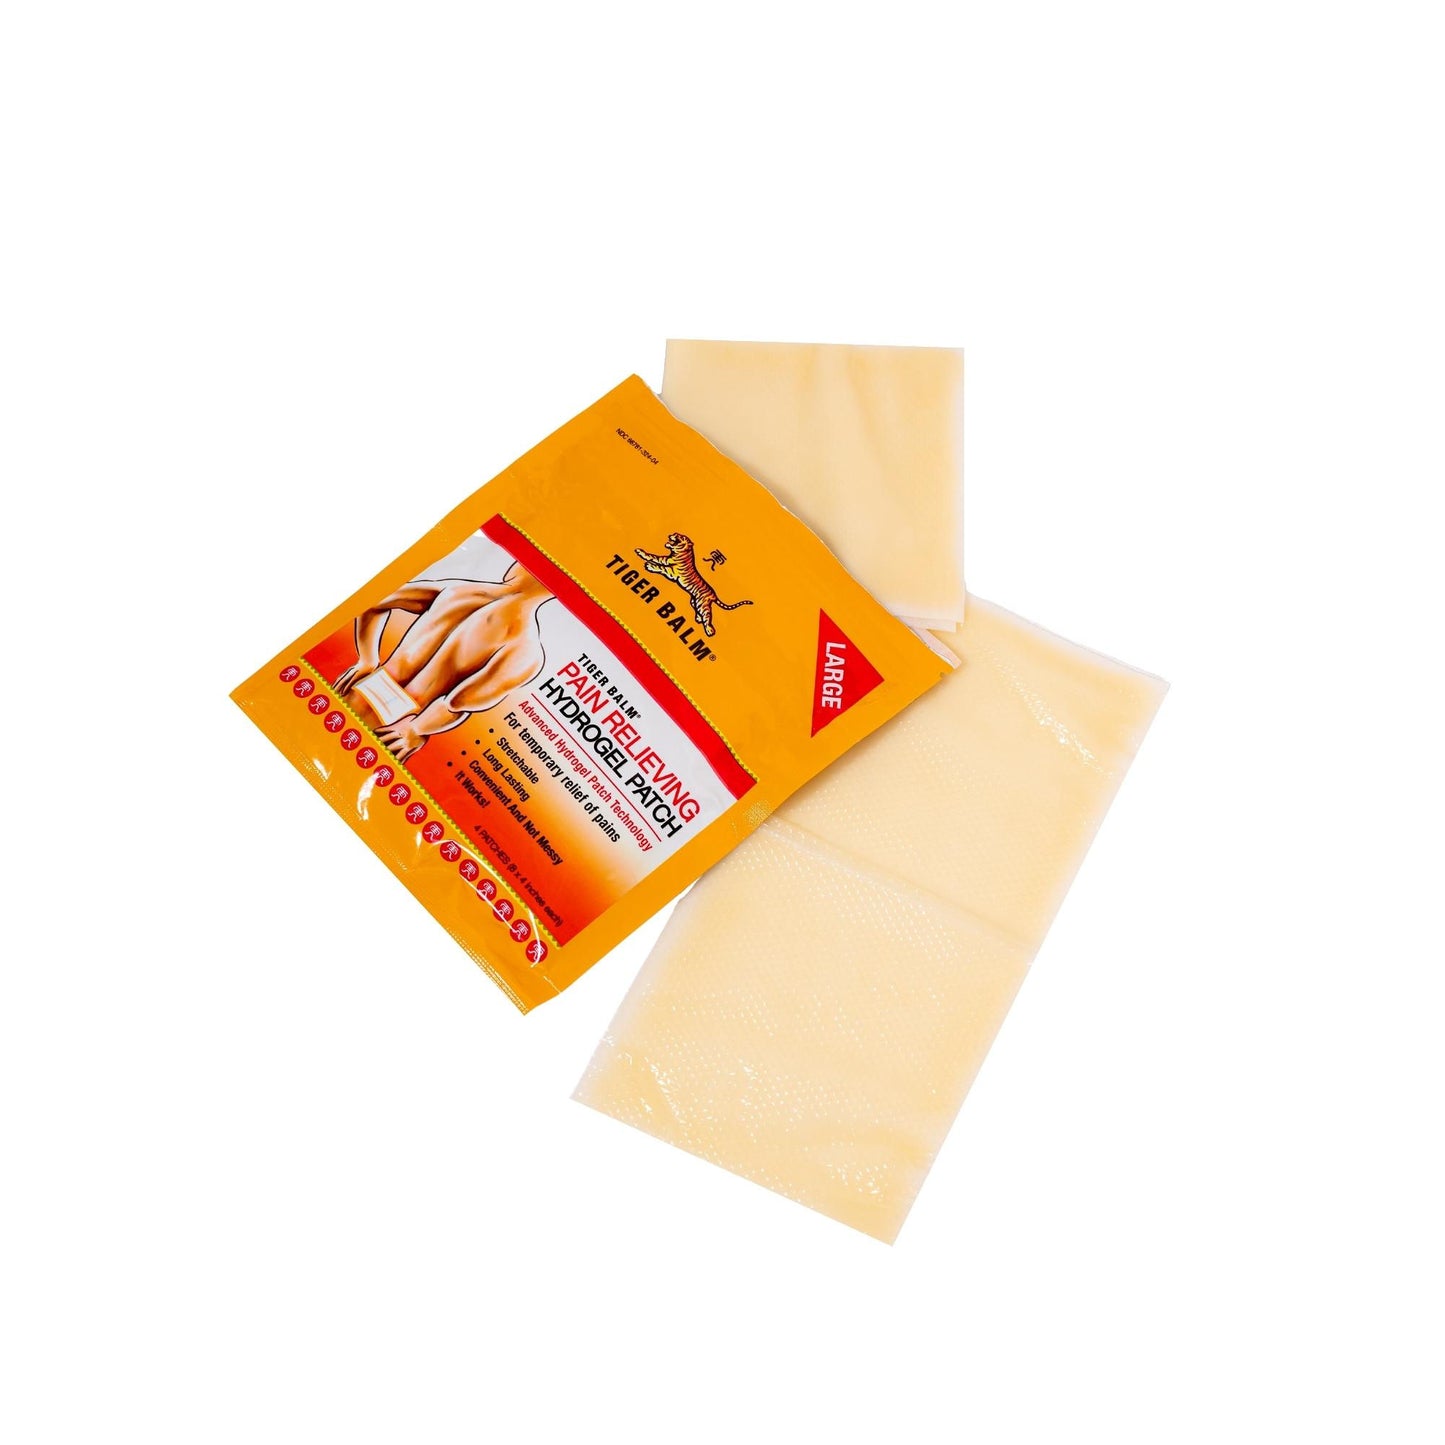 Tiger Balm Pain Relieving Hydrogel Patch